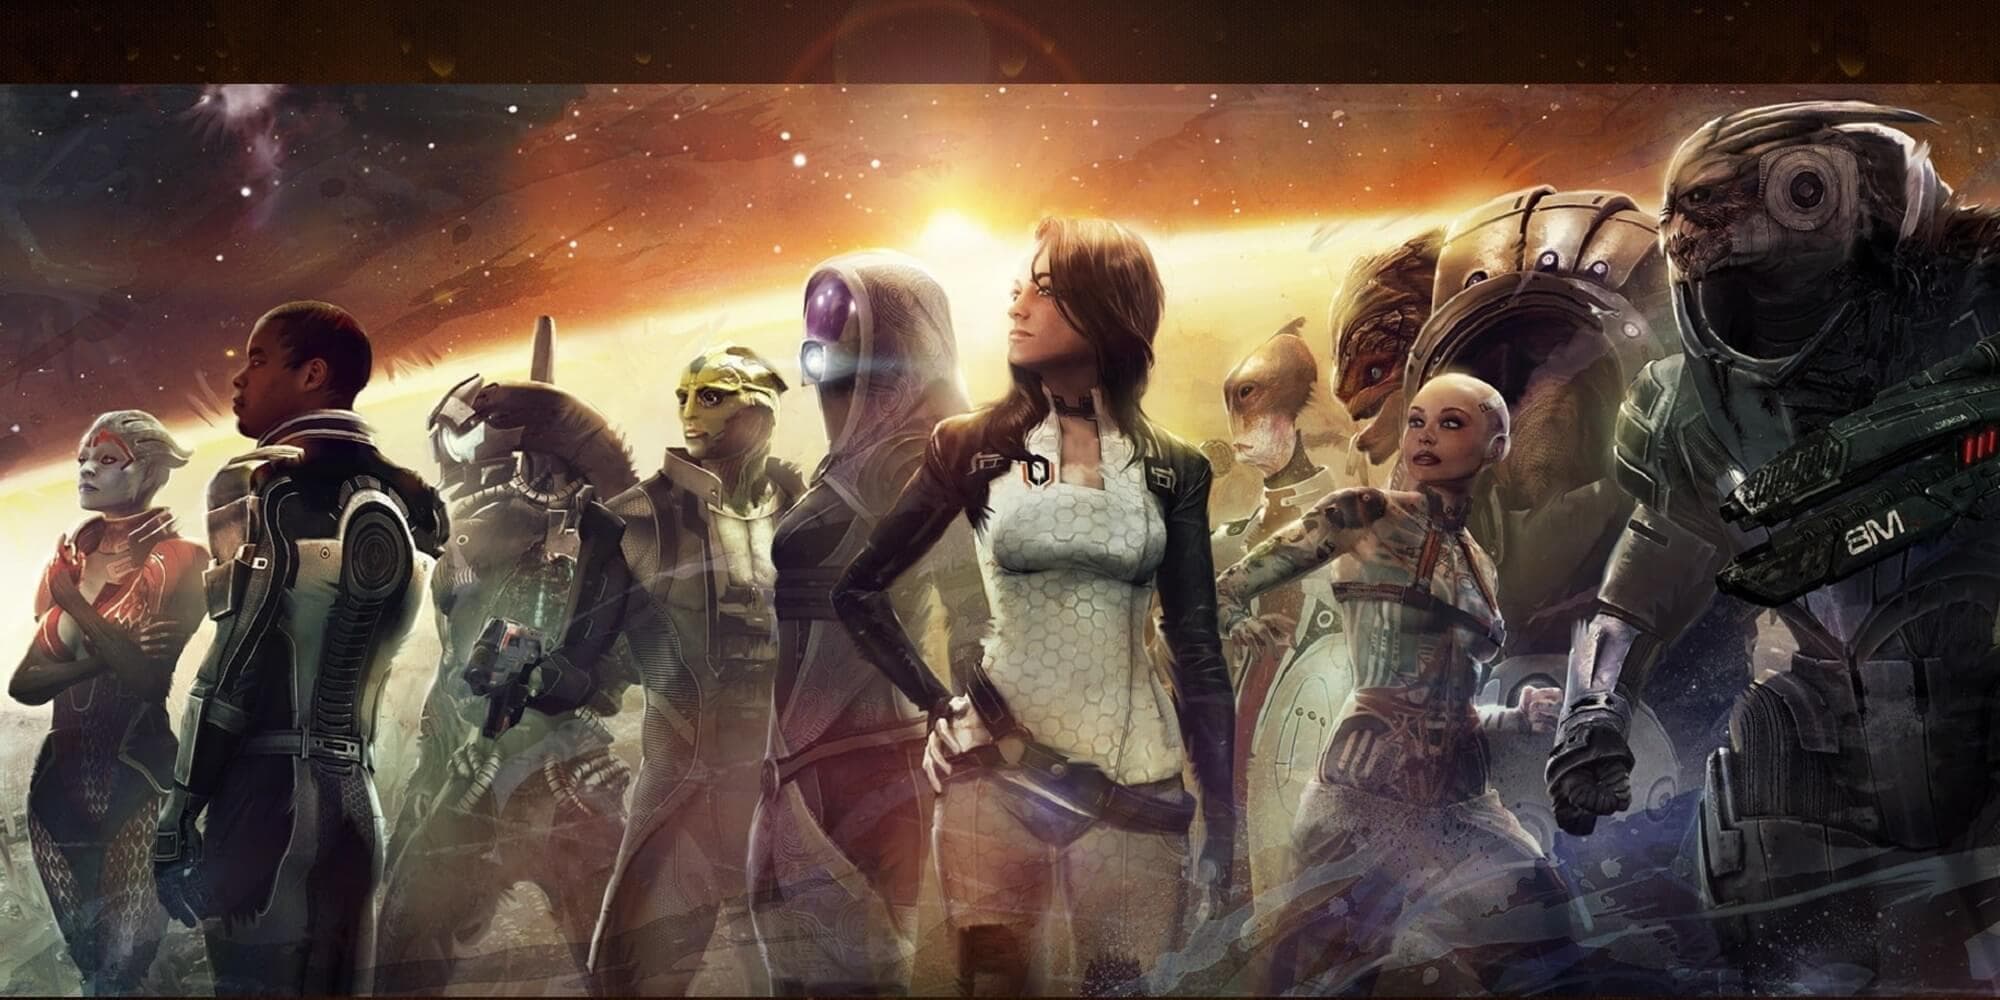 All the companions you can recruit in Mass Effect 2.